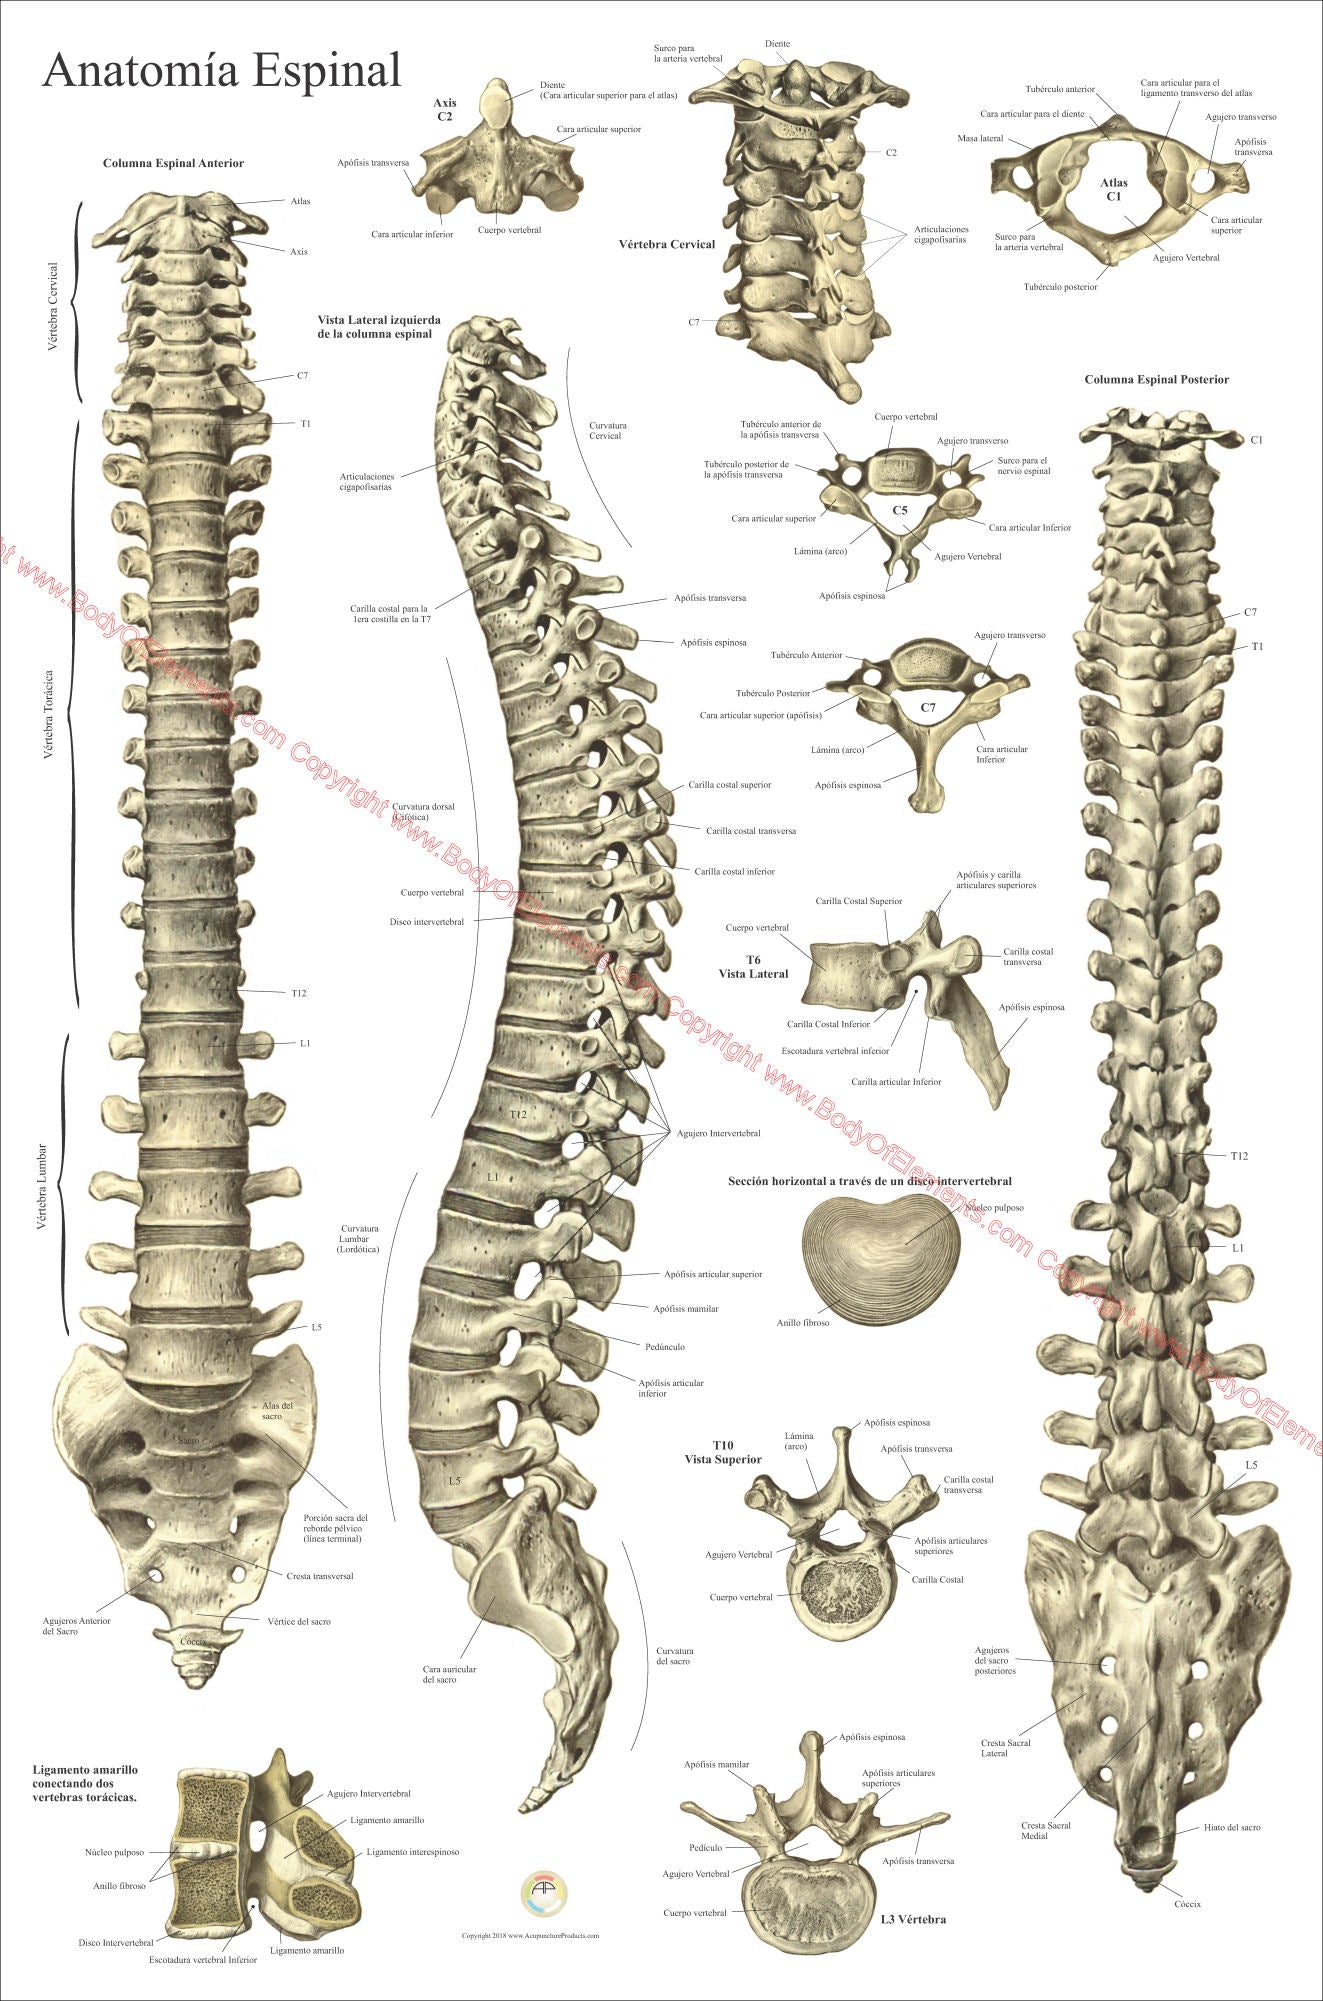 Human spinal anatomy poster in Spanish